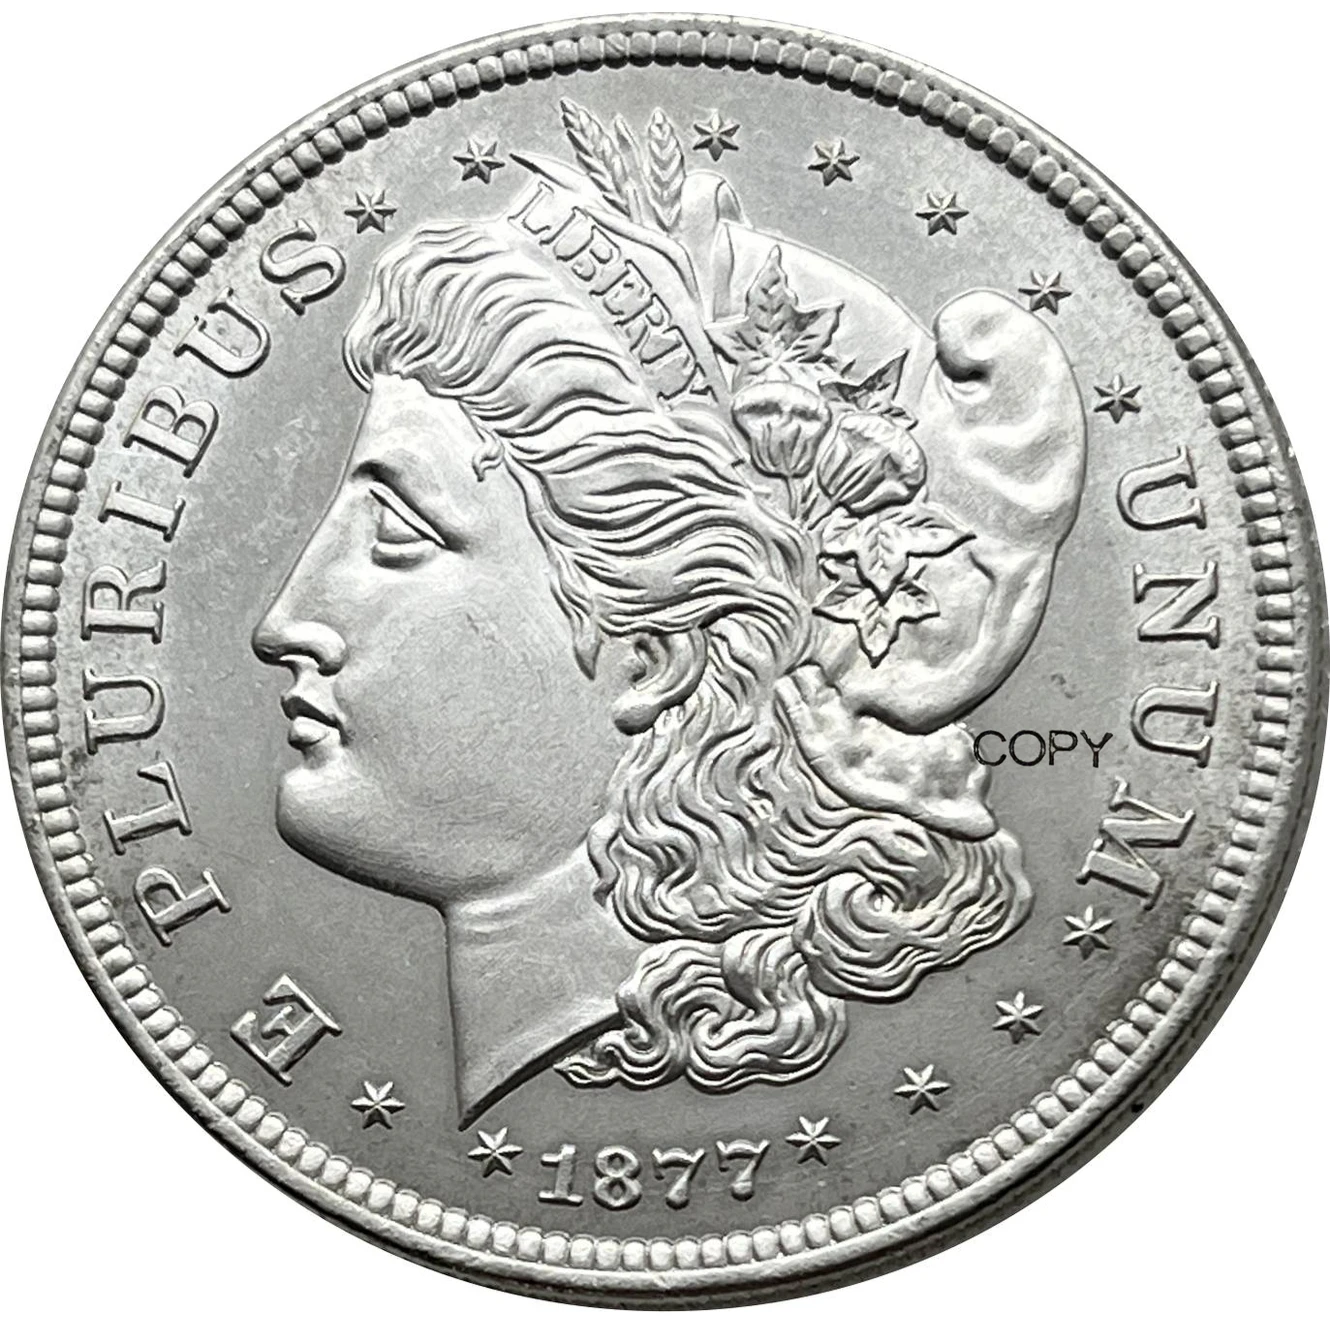 United States Of America 1 One Dollar 1885 Cc Morgan Dollar Cupronickel  Silver Plated Copy Coins - Non-currency Coins - AliExpress